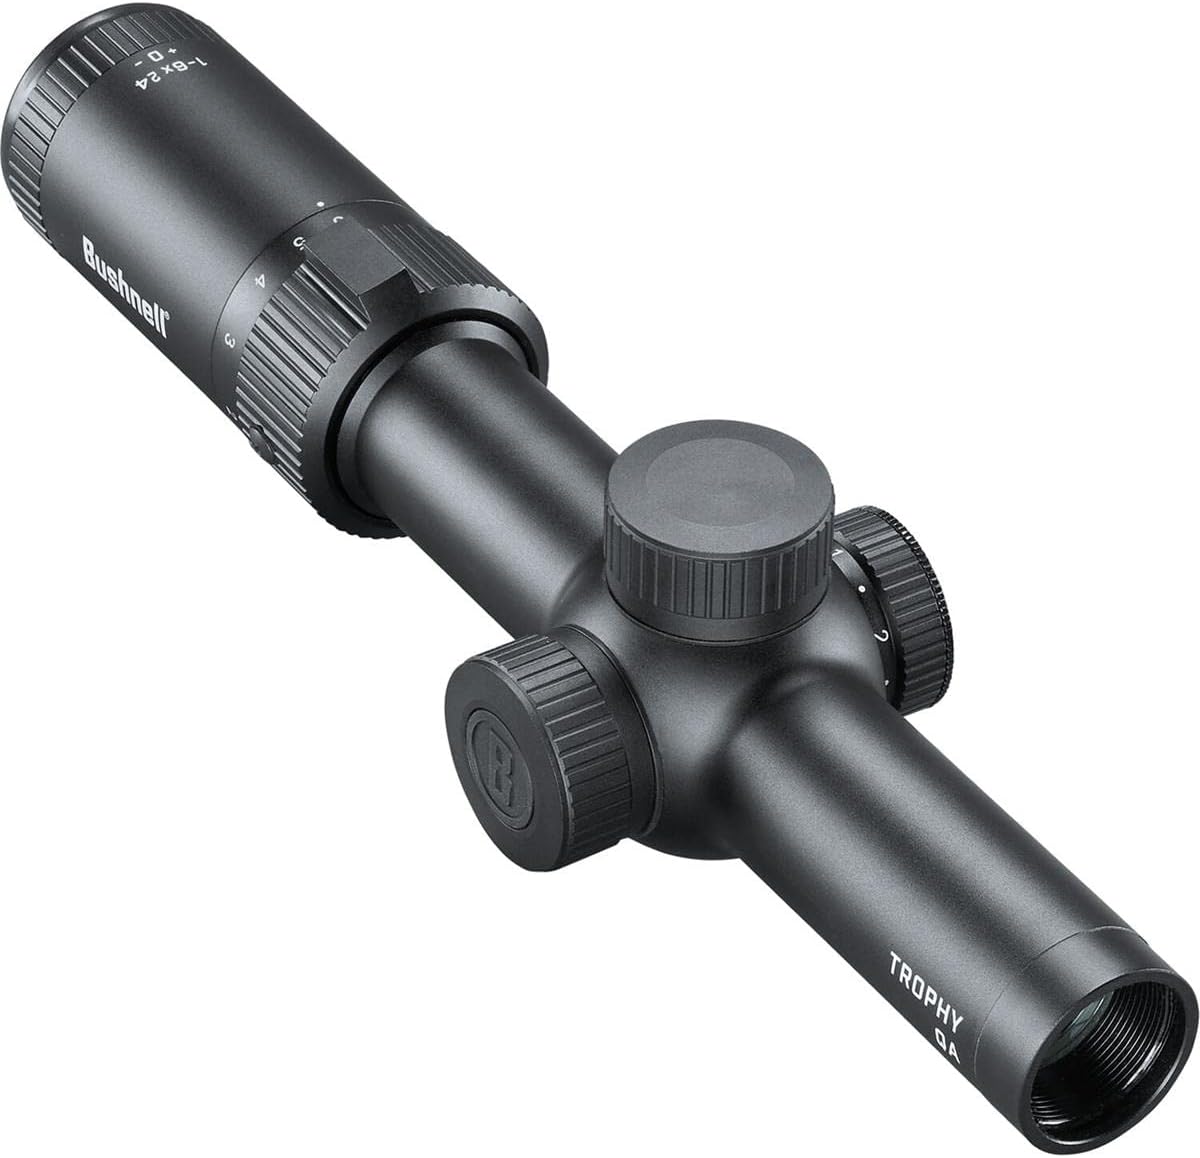 Bushnell Trophy Quick Acquisition 1-6x24 Riflescope, Illuminated Dot Drop Reticle Rifle Scope for Short to Mid-Range Hunting - Bushnell Trophy Quick Acquisition Riflescope Review